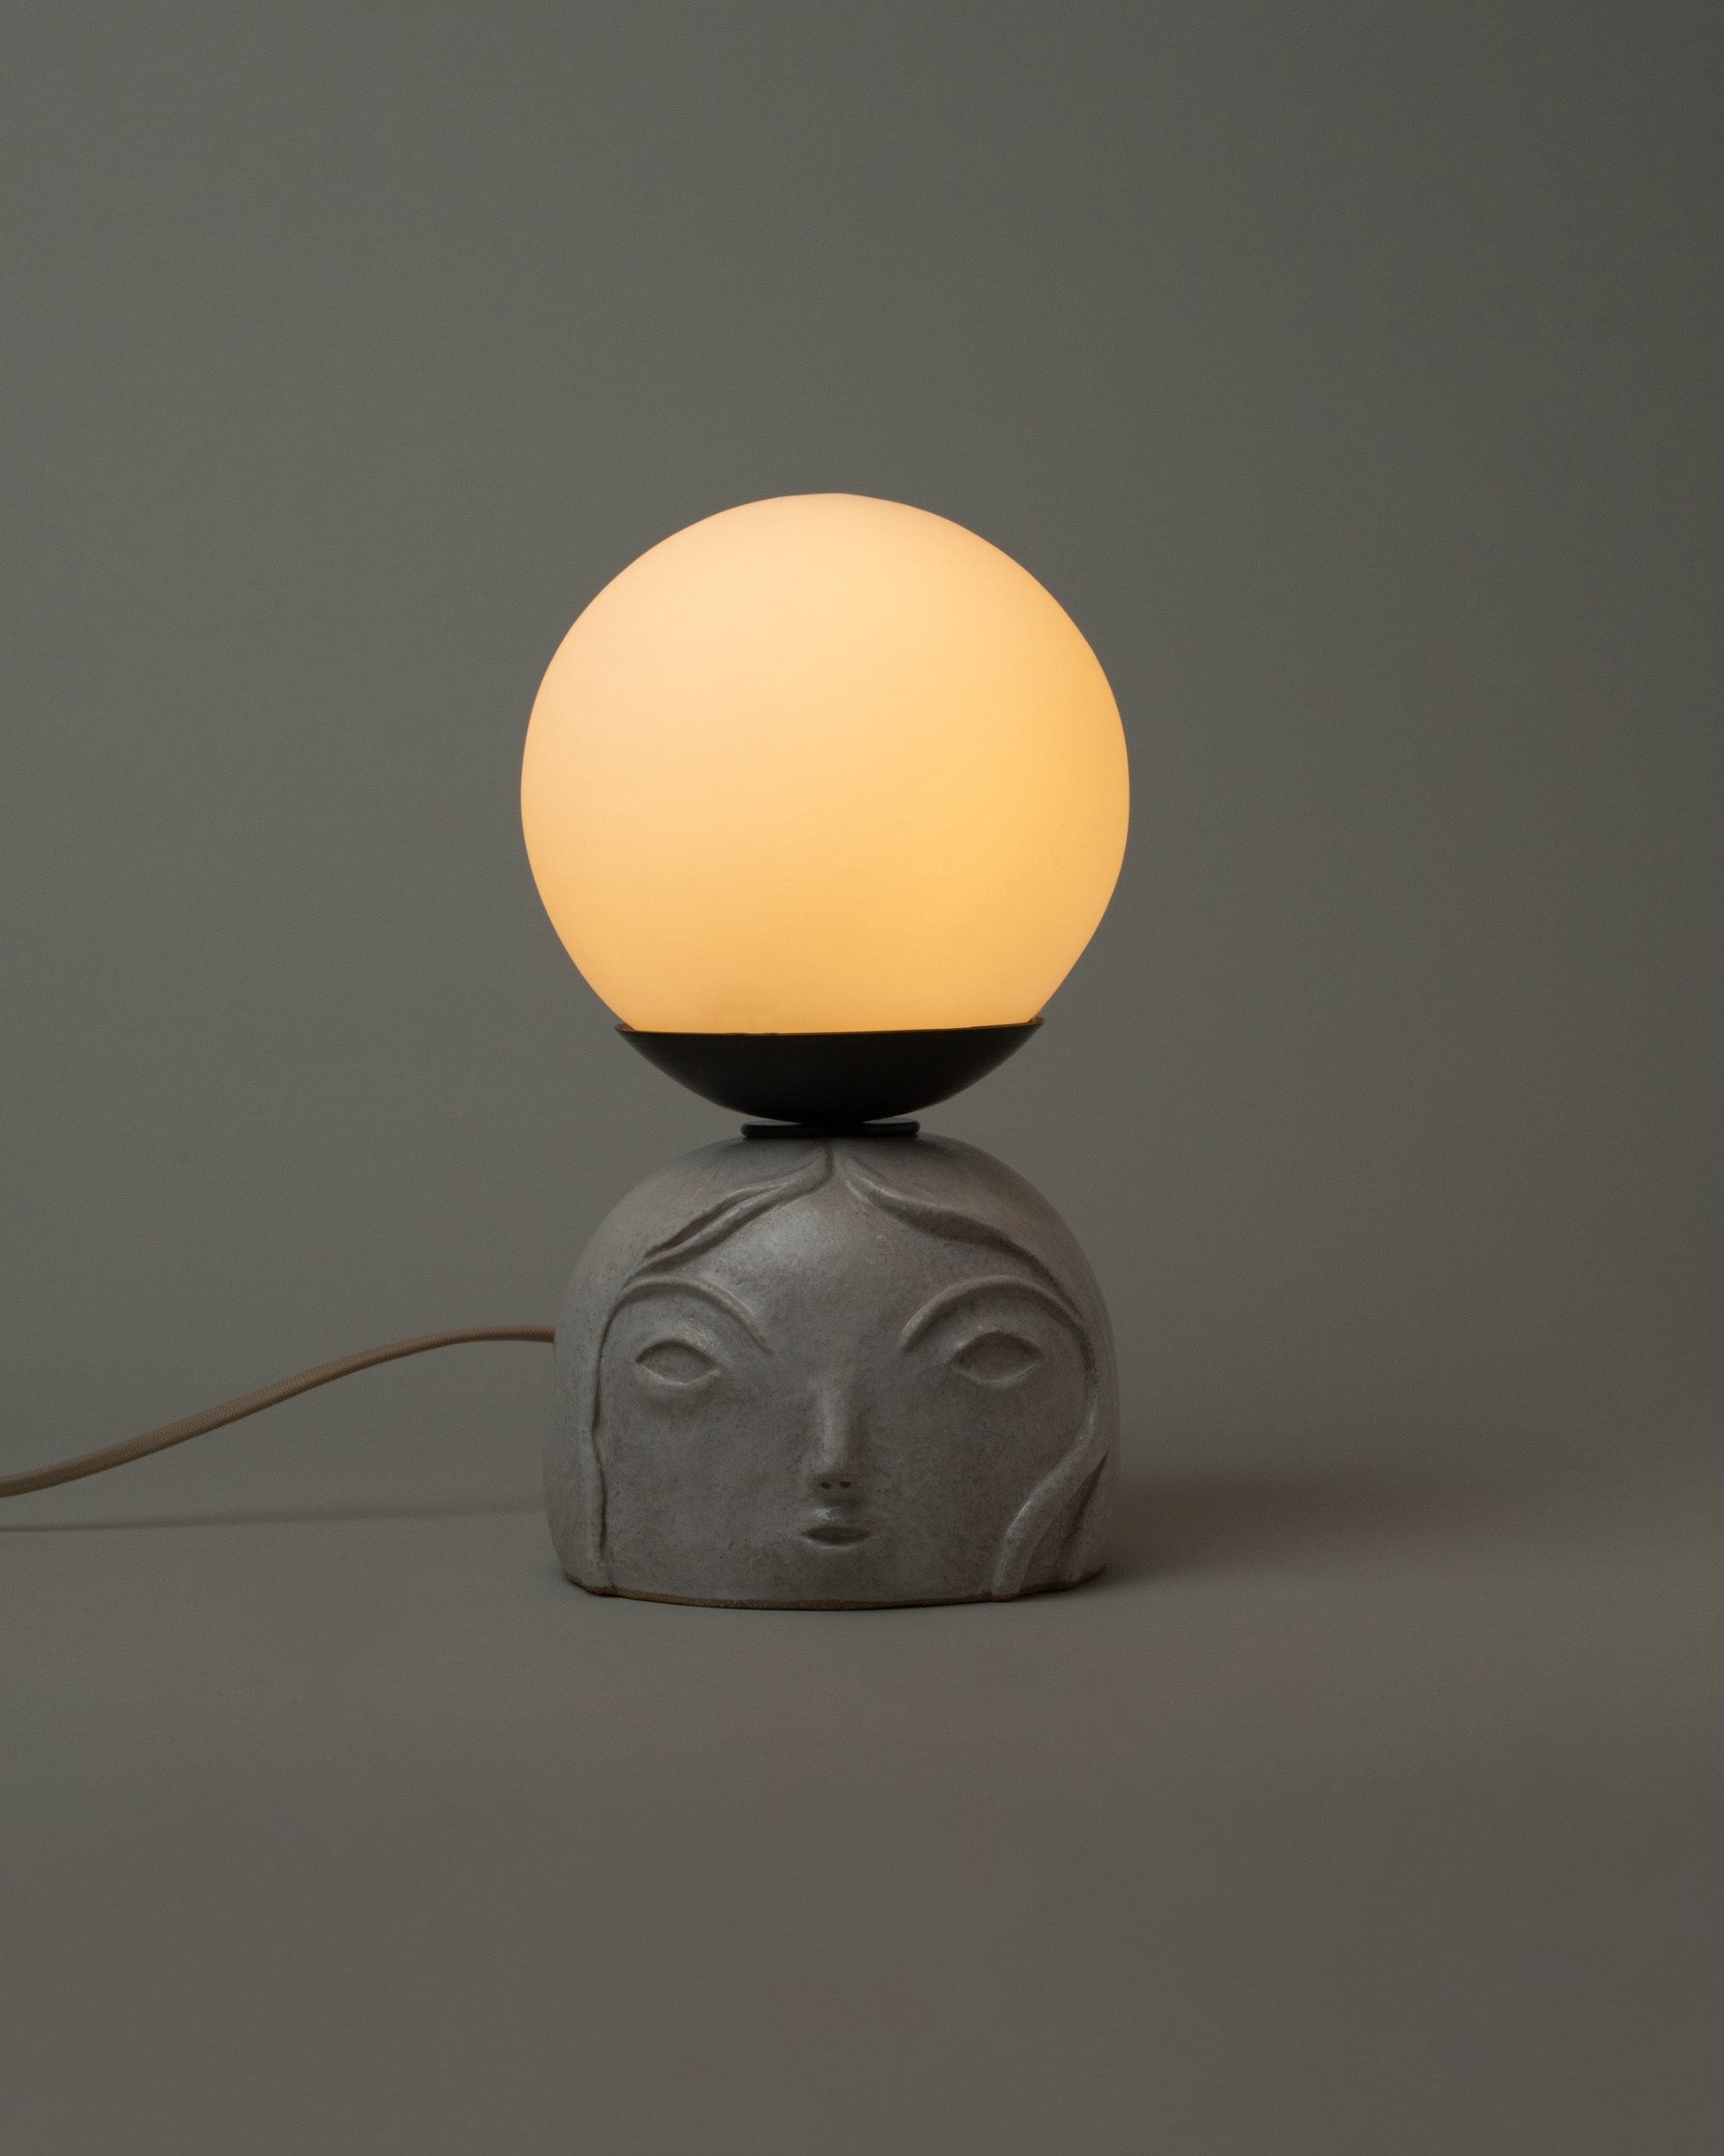 Detail view of Rami Kim Small / White Floating Penelope Table Lamp on light color background with lamp on.